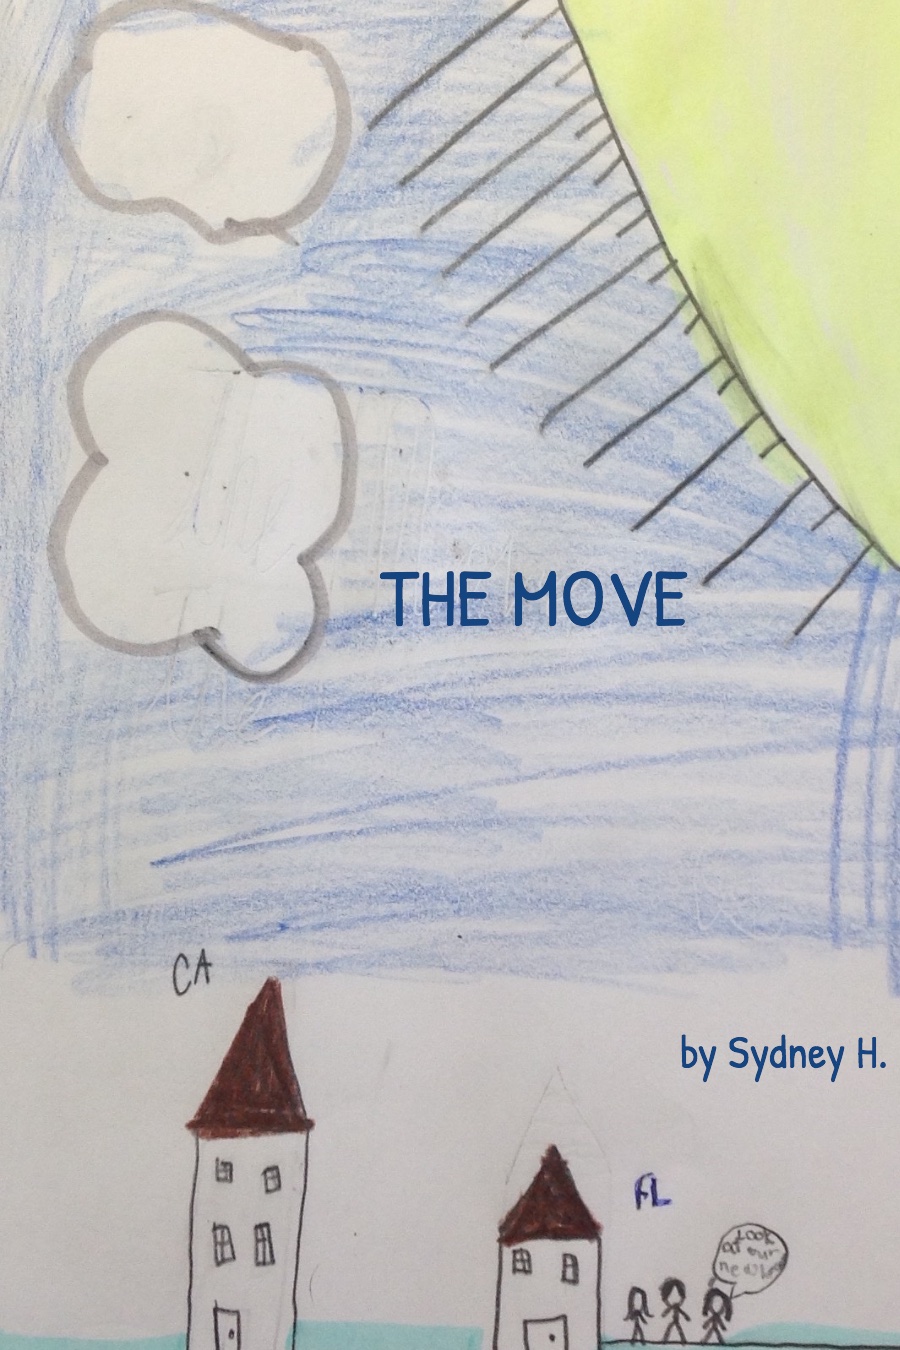 The Move by Sydney H